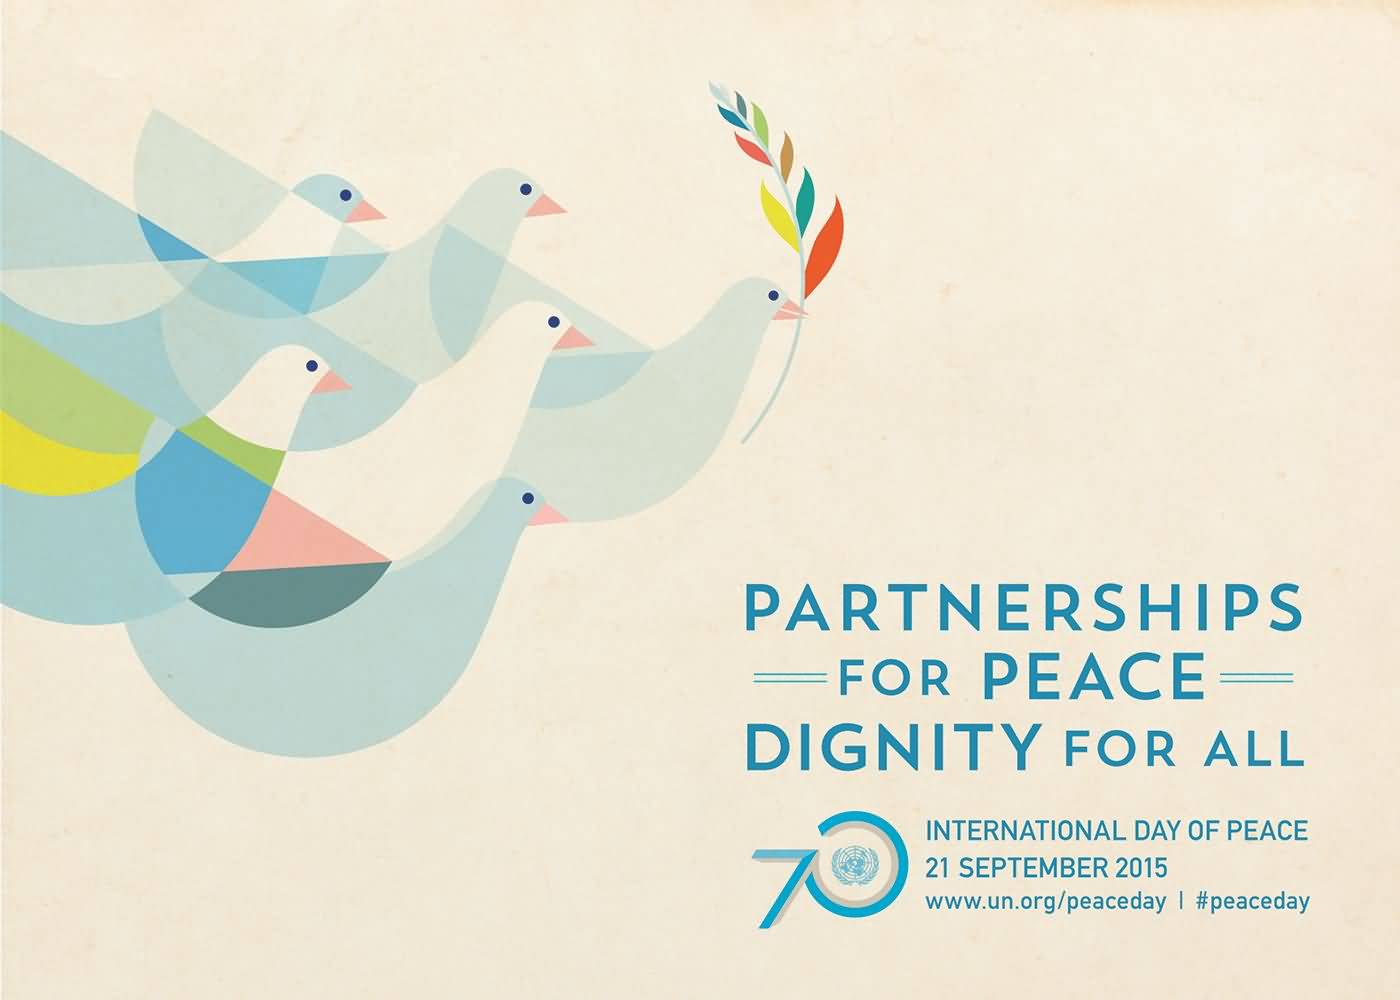 Partnerships For Peace Dignity For All International Day of Non-Violence